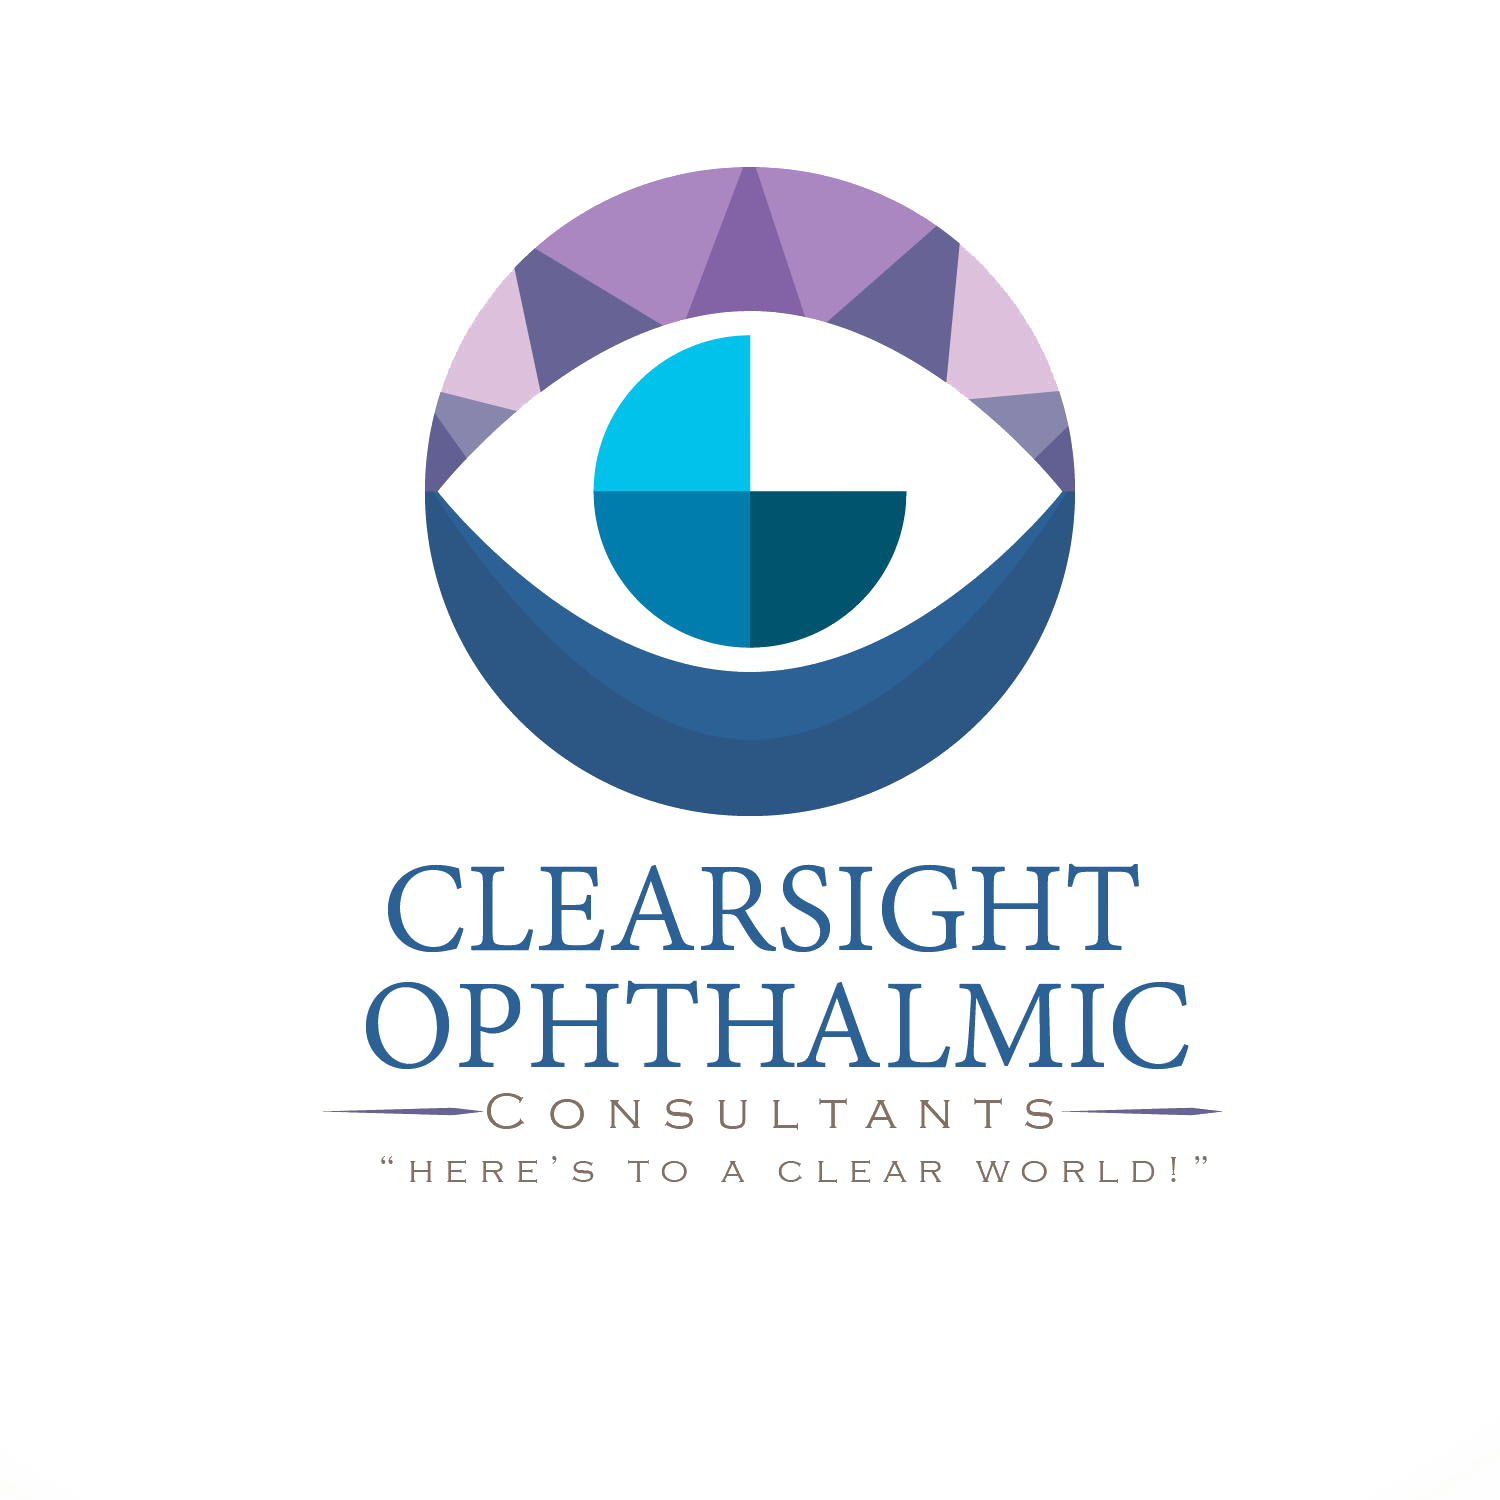 Clearsight Ophthalmic Consultants